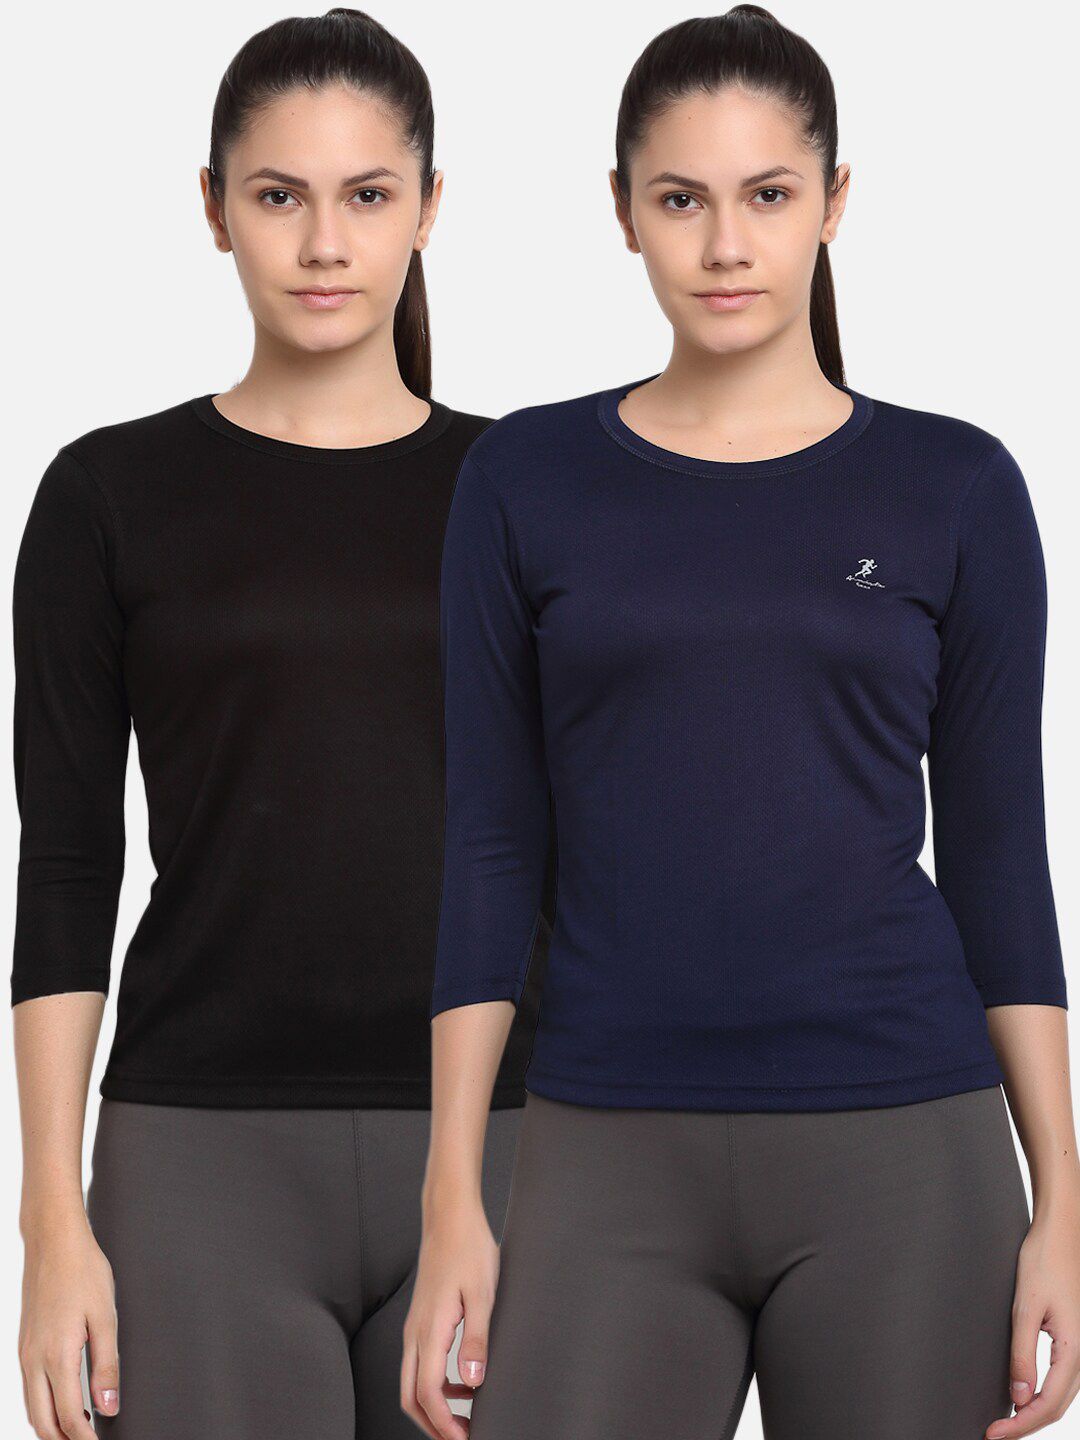 ARMISTO Women Navy Pack Of 2 Blue & Black Dri-FIT Slim Fit Training or Gym T-shirts Price in India